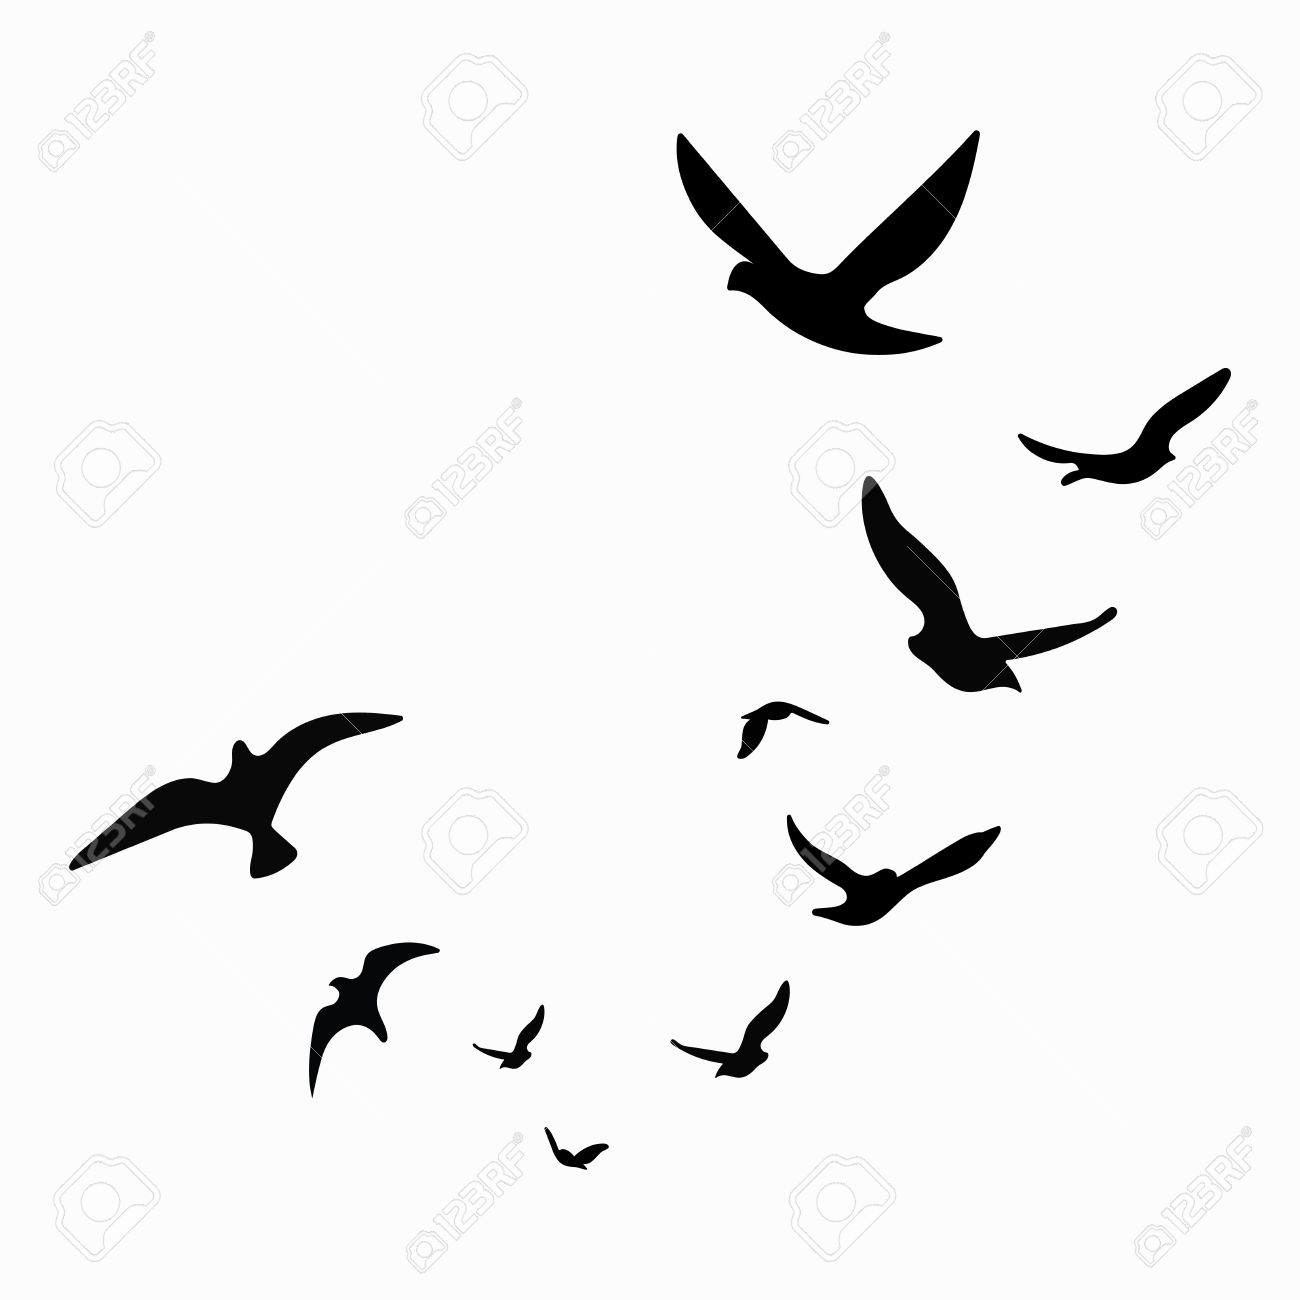 Silhouette Of A Flock Of Birds Black Contours Of Flying Birds pertaining to measurements 1300 X 1300